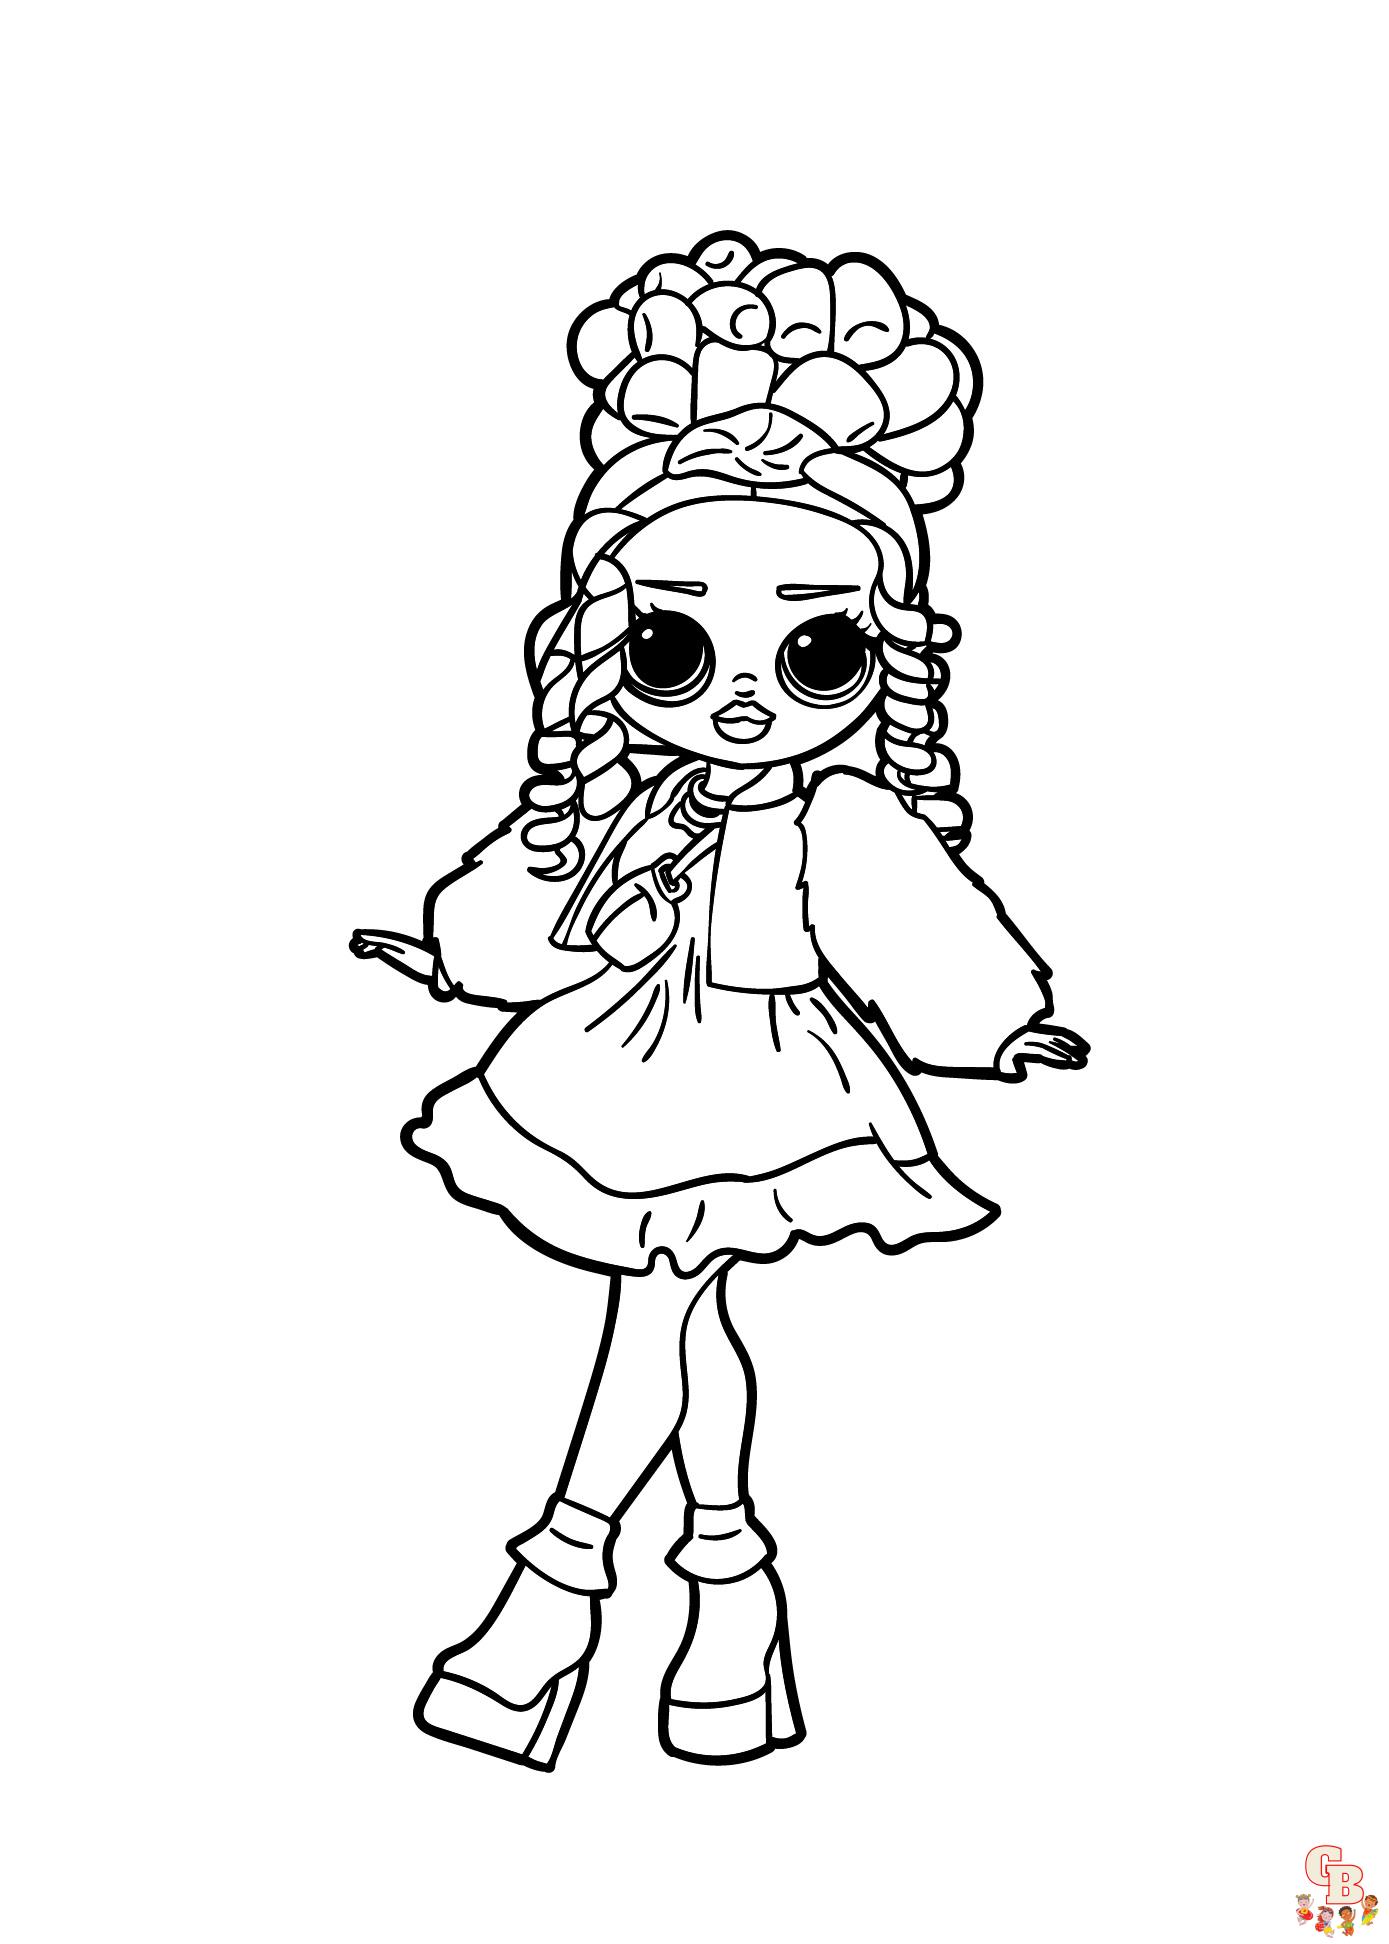 omg fashion lol omg doll coloring pages 3